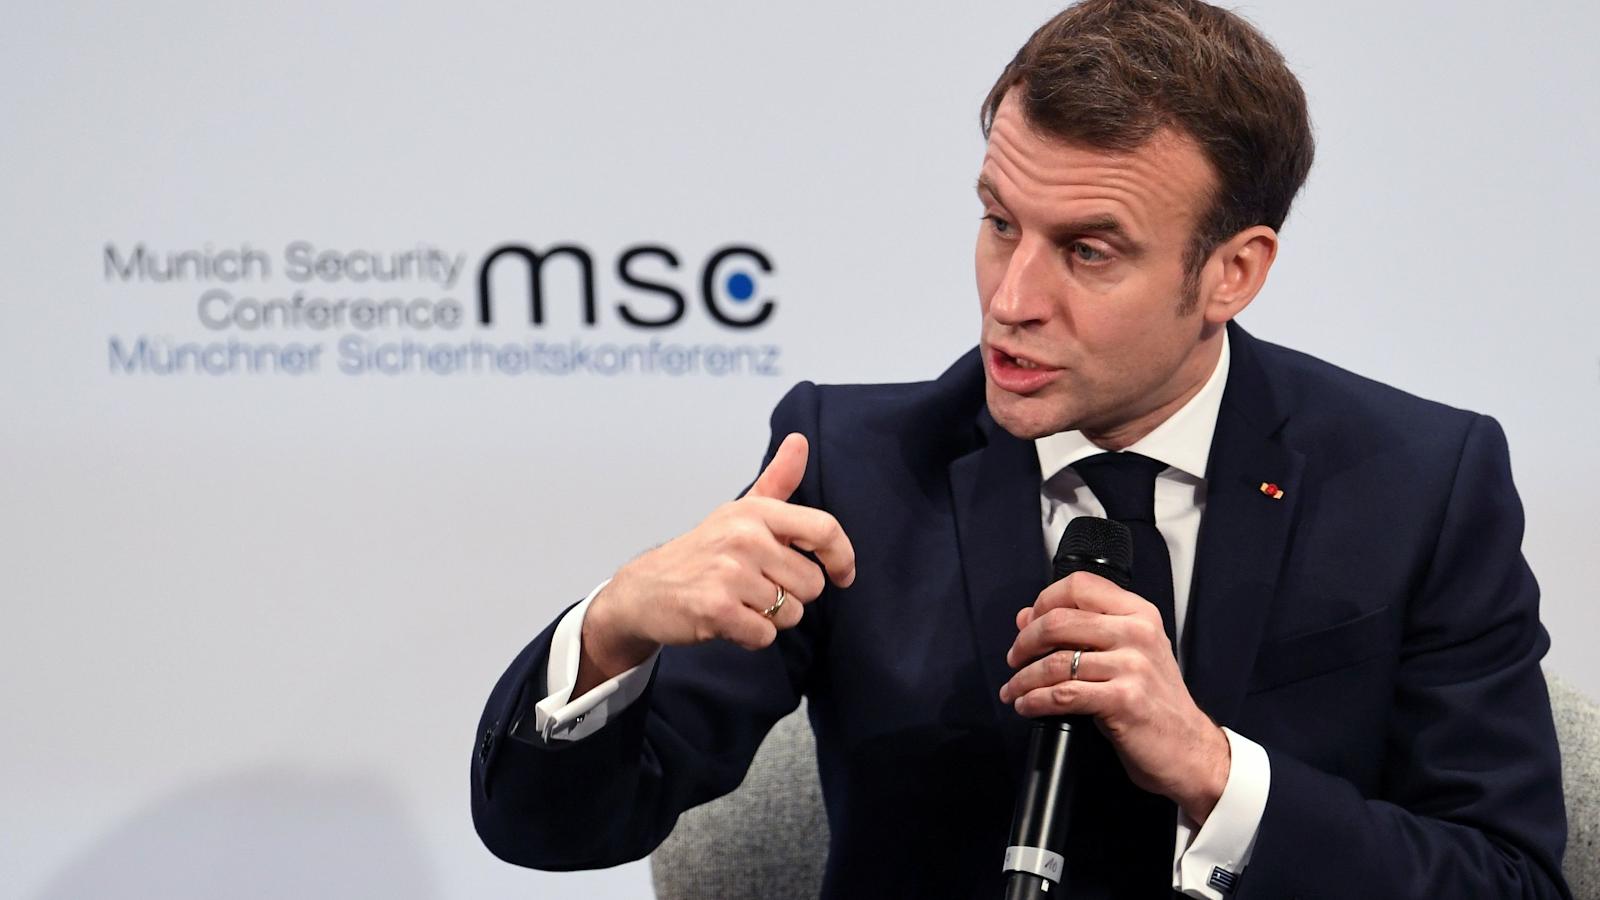 Macron says Europe should consider developing nuclear defense